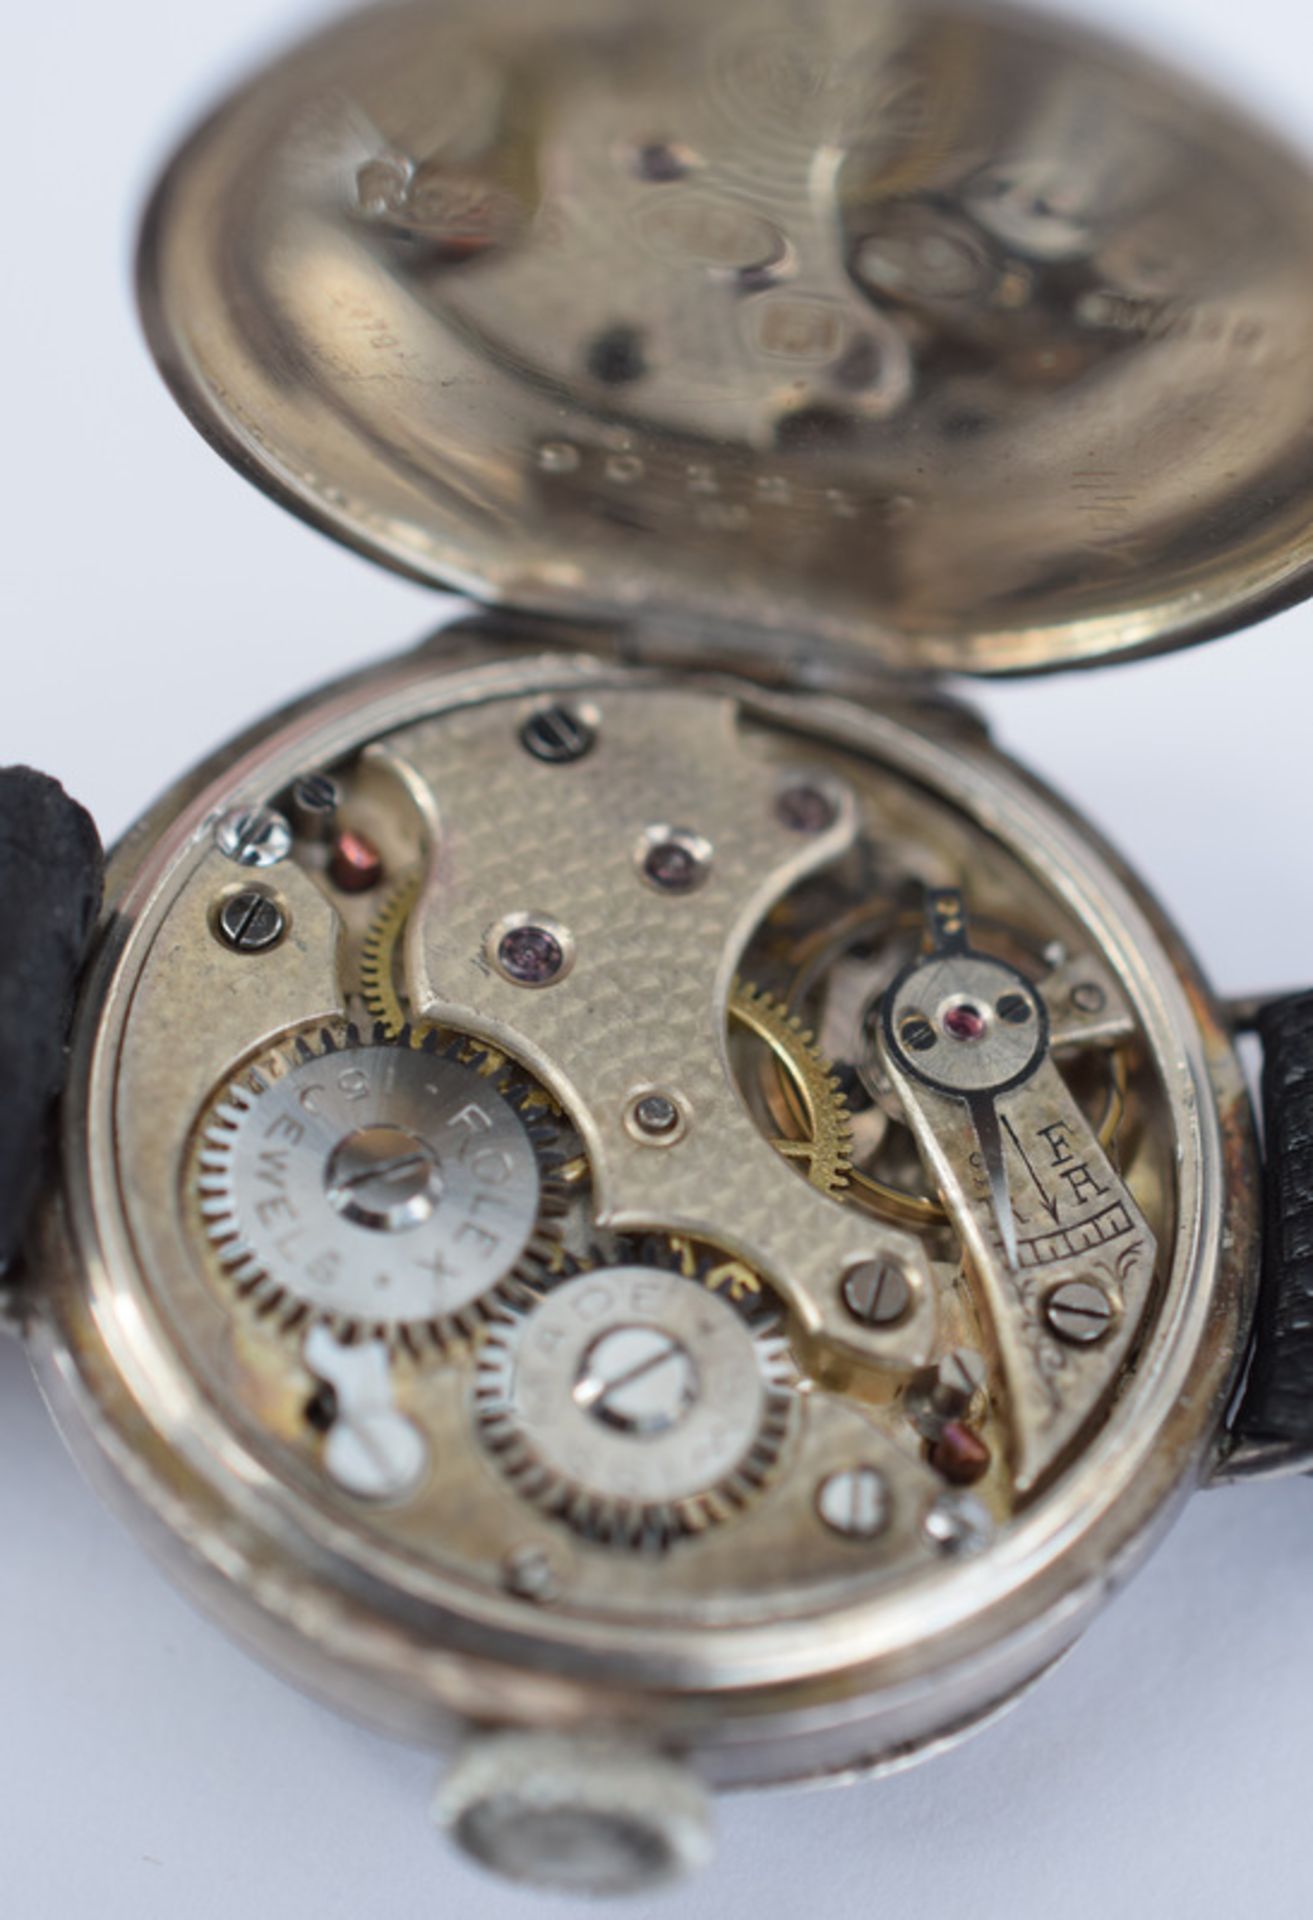 1916 Rolex Silver Trench Watch. - Image 7 of 7